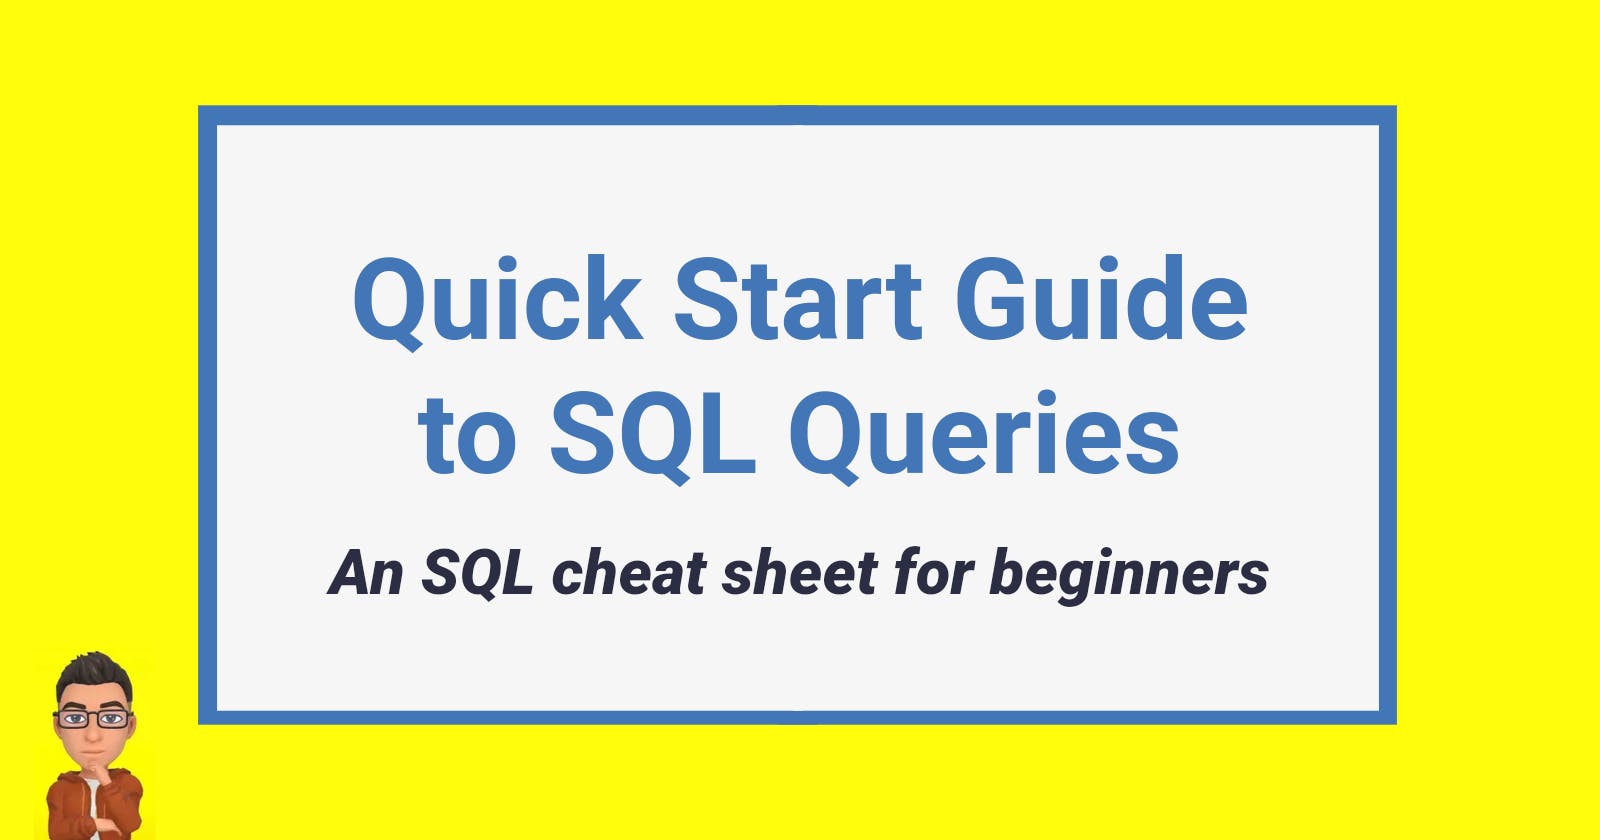 Quick Start Guide to SQL Queries